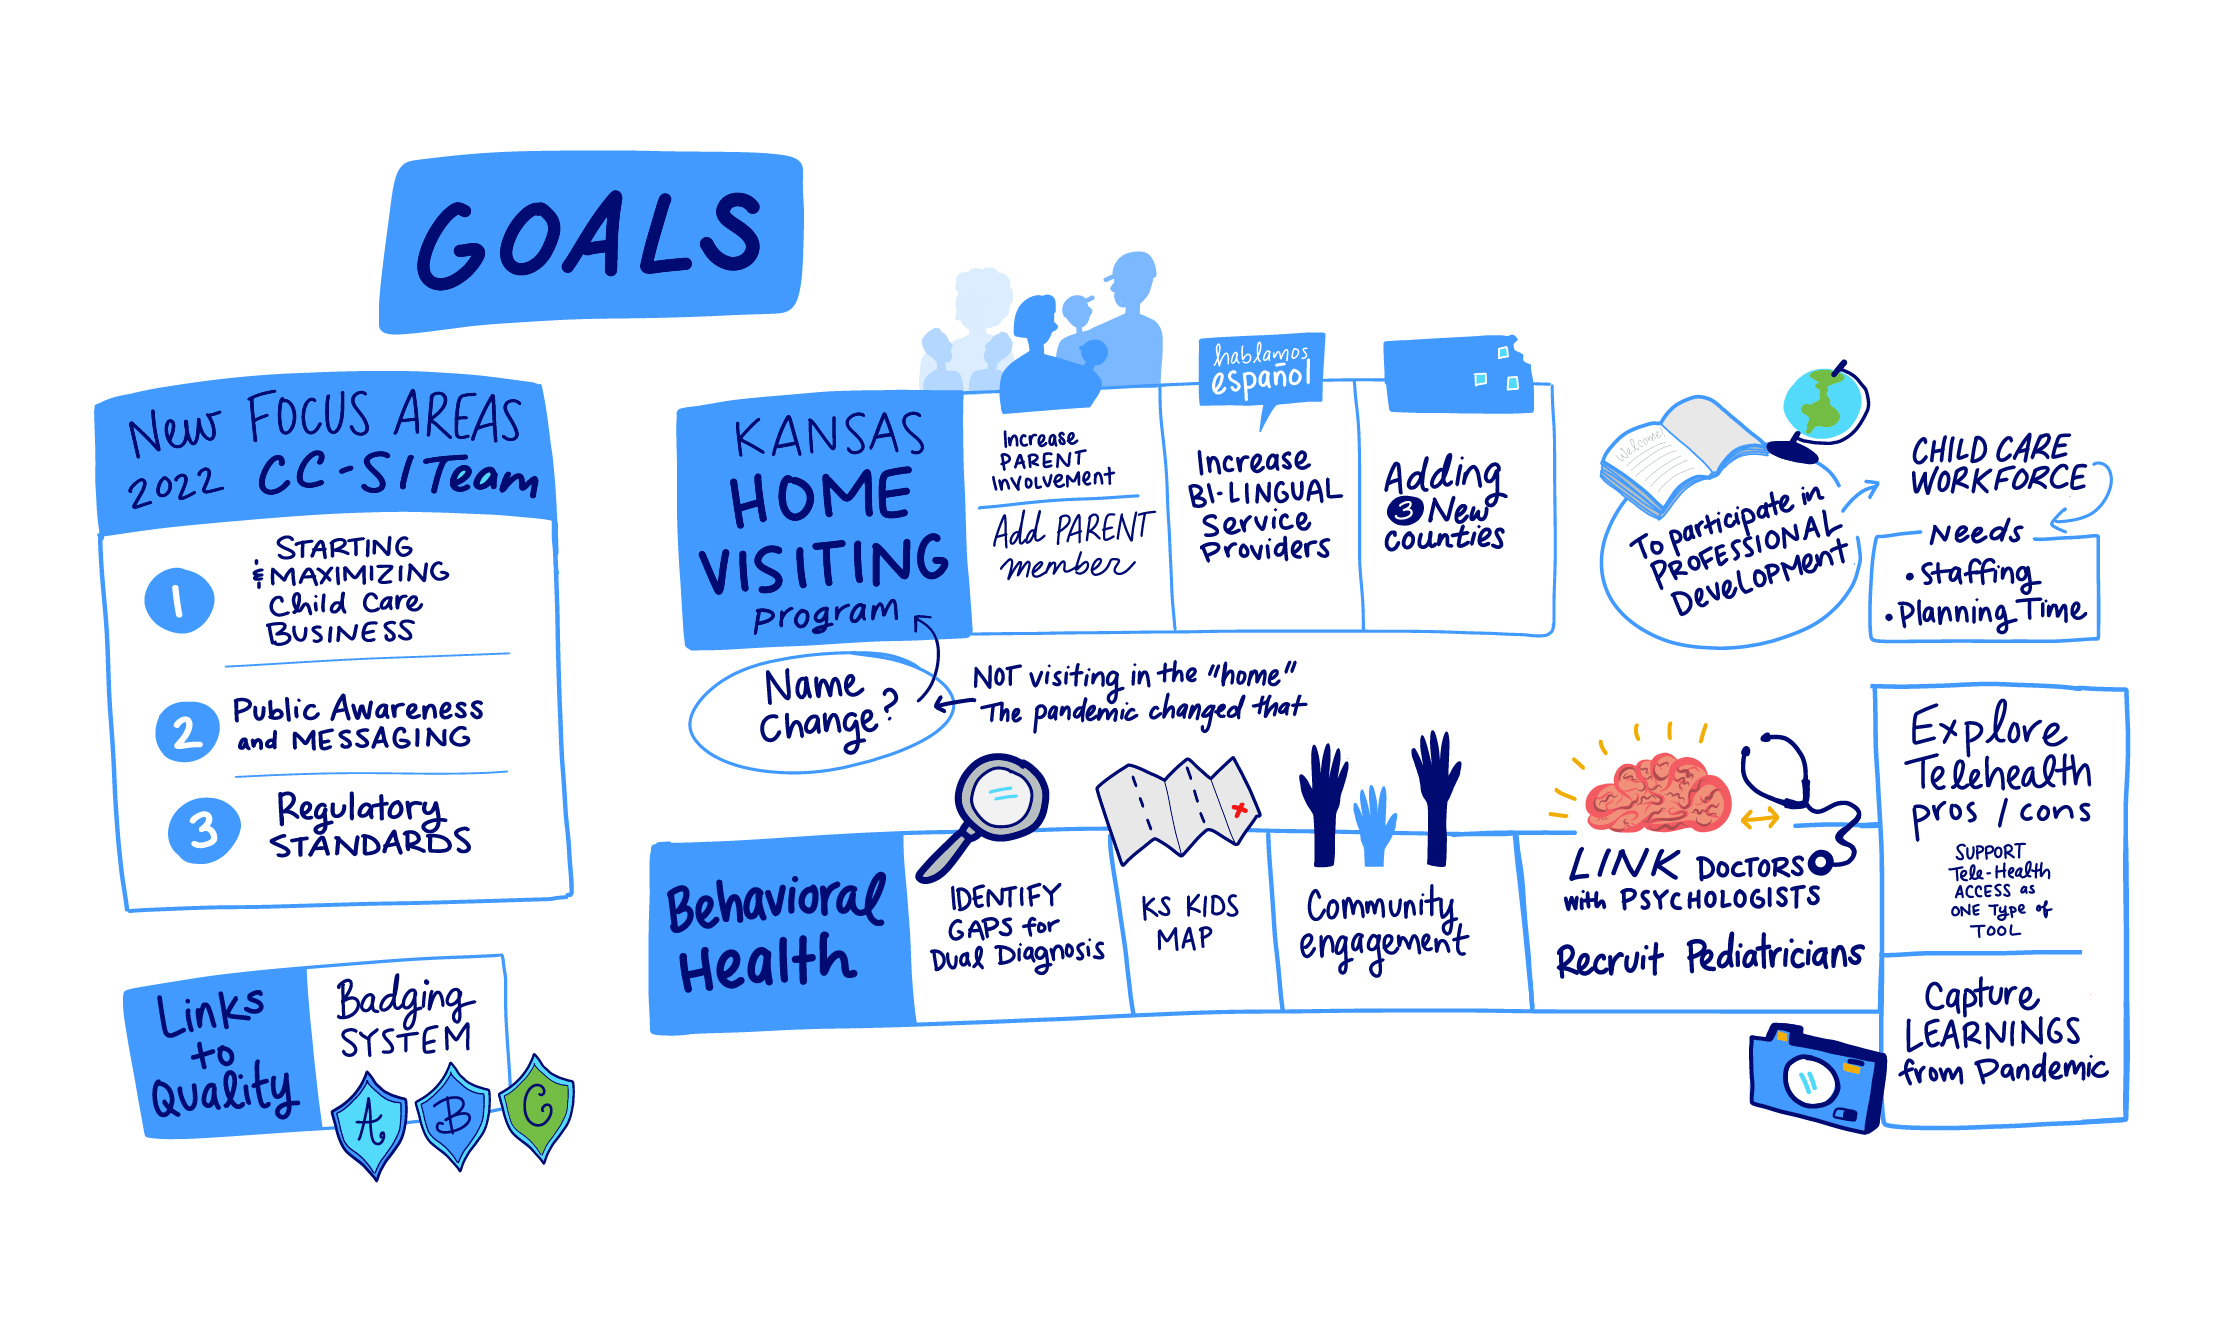 Graphic recording summary of the goals